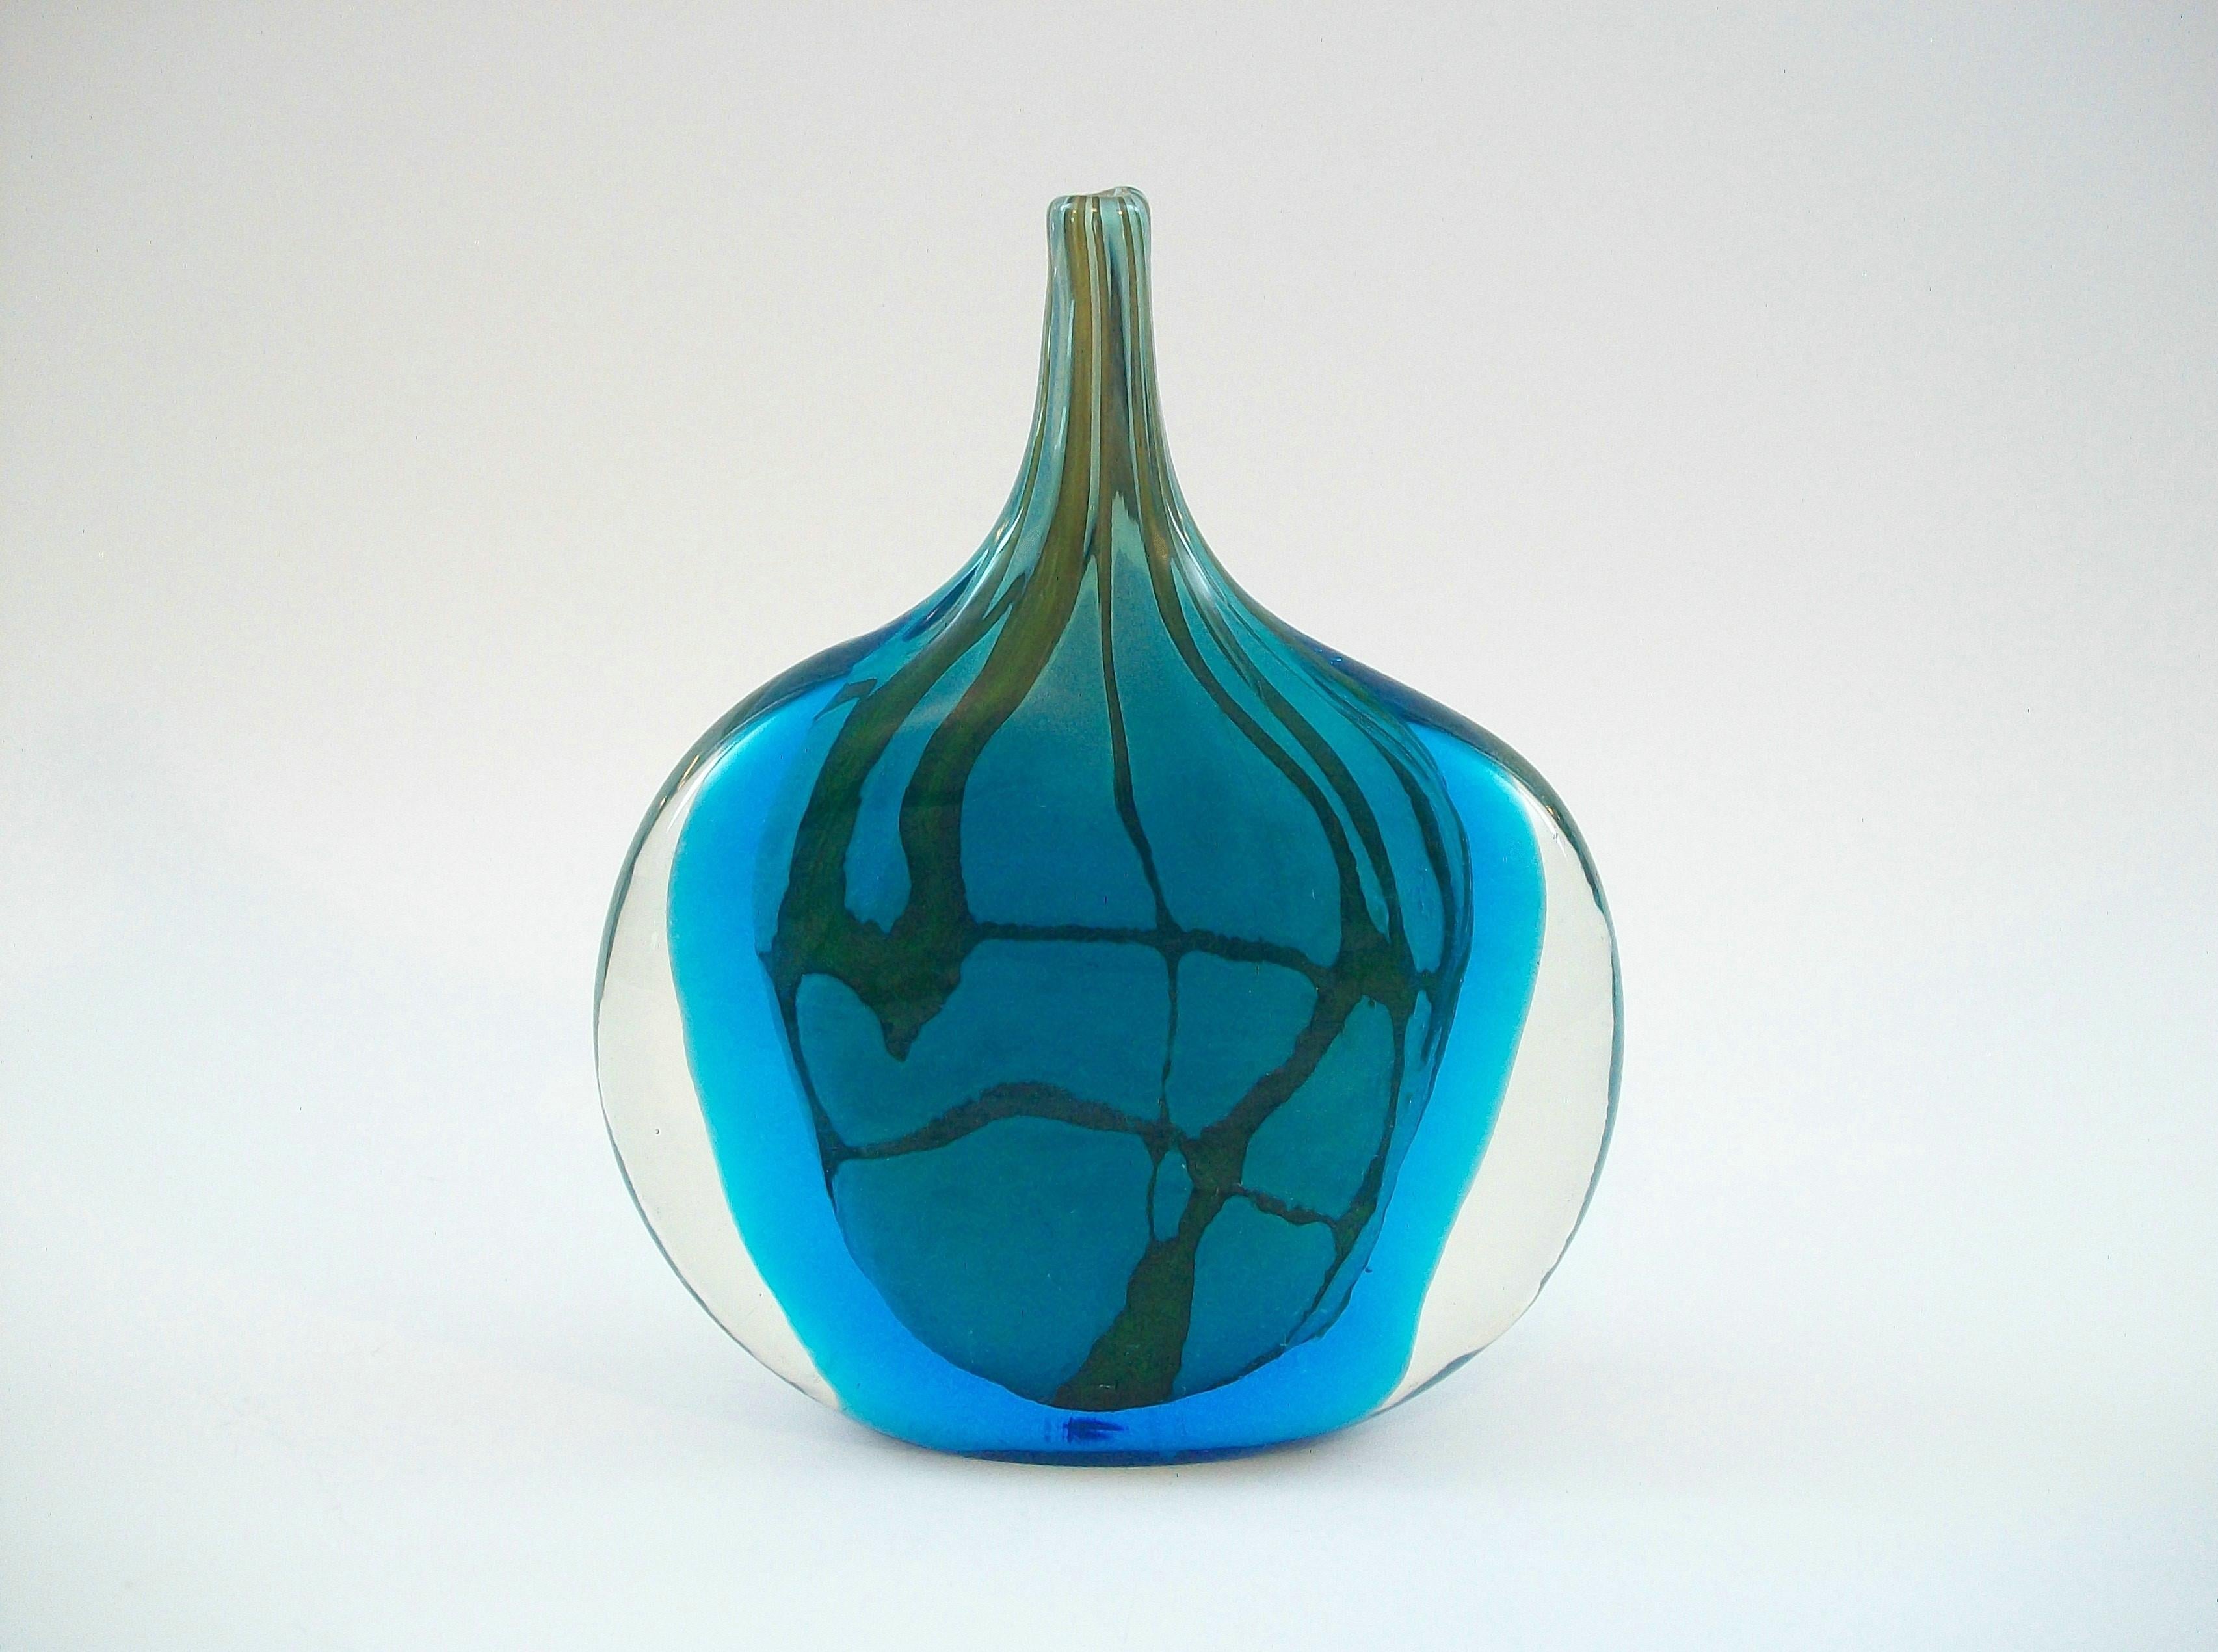 MDINA GLASS - MICHAEL HARRIS - Mid Century studio glass 'fish' vase - featuring a flattened form with cased blue and green glass to the interior and clear glass to the wings - polished finish - flat ground base - unsigned (likely originally had a